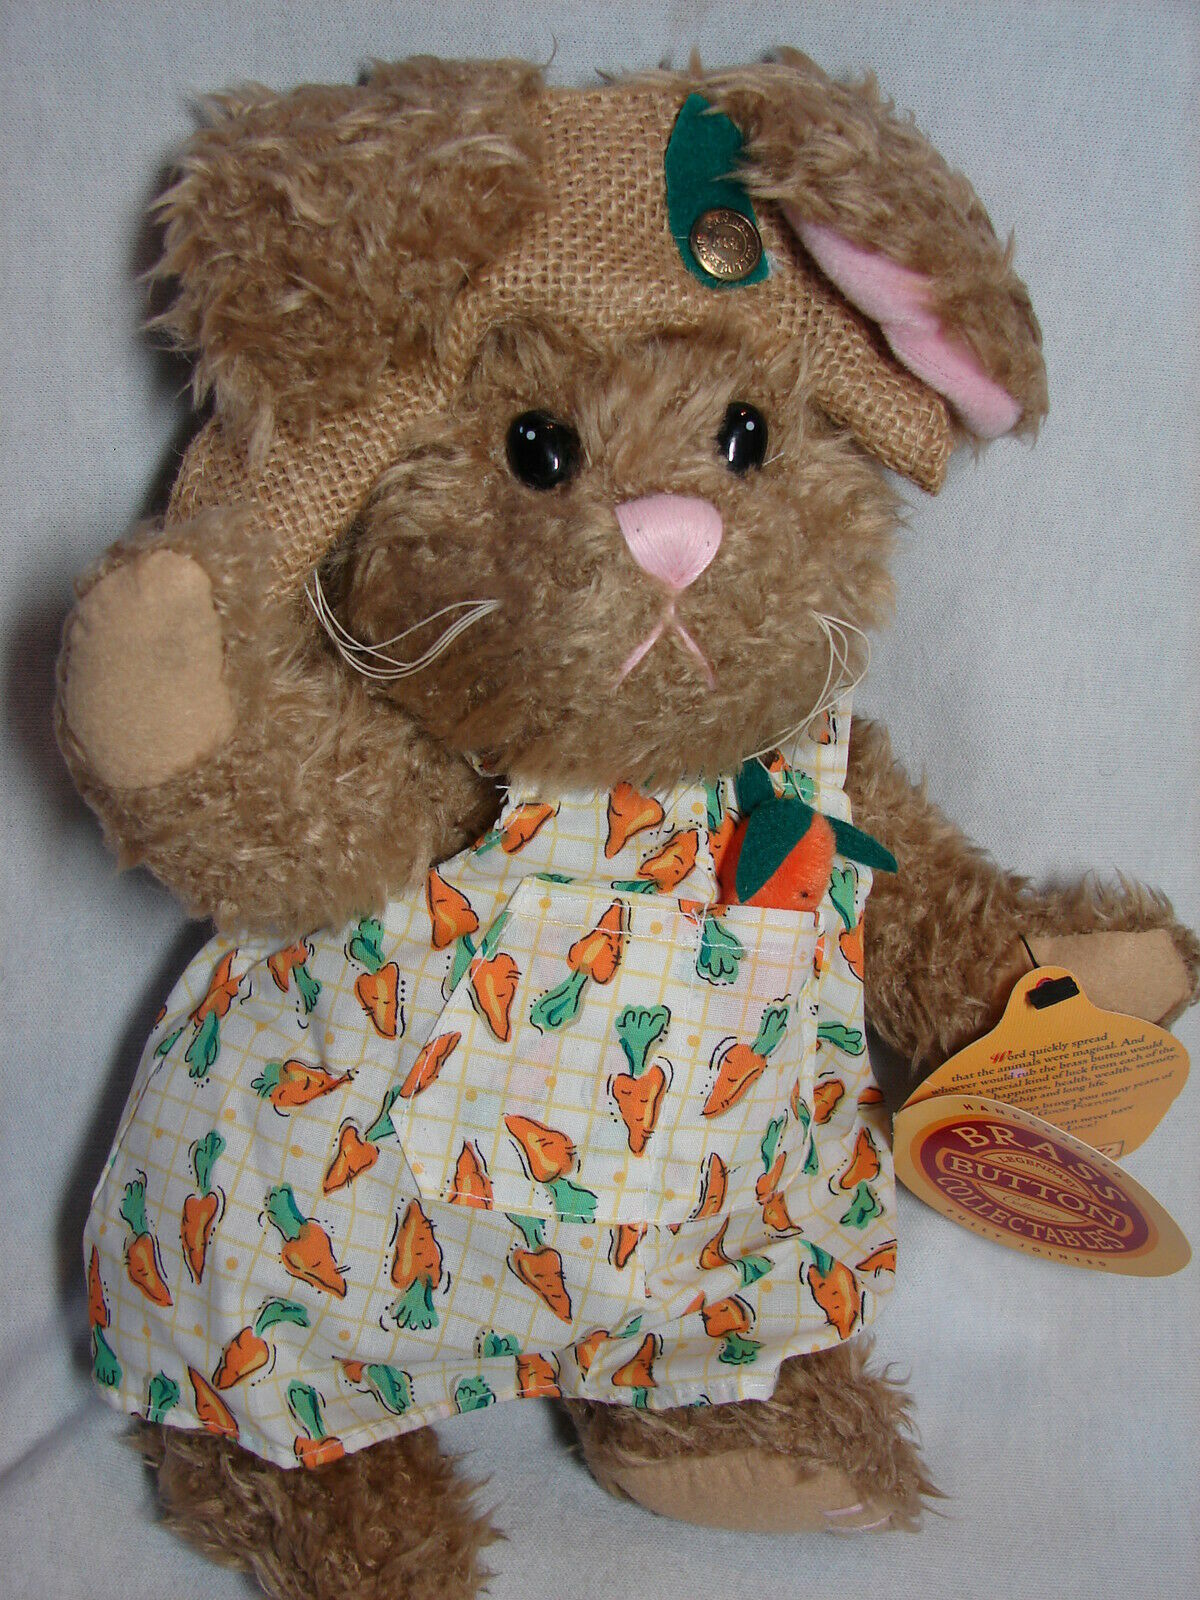 Pickford Brass Button Bears 'hare Of Serenity'  Plush Jointed 11"  Rabbit / Hare